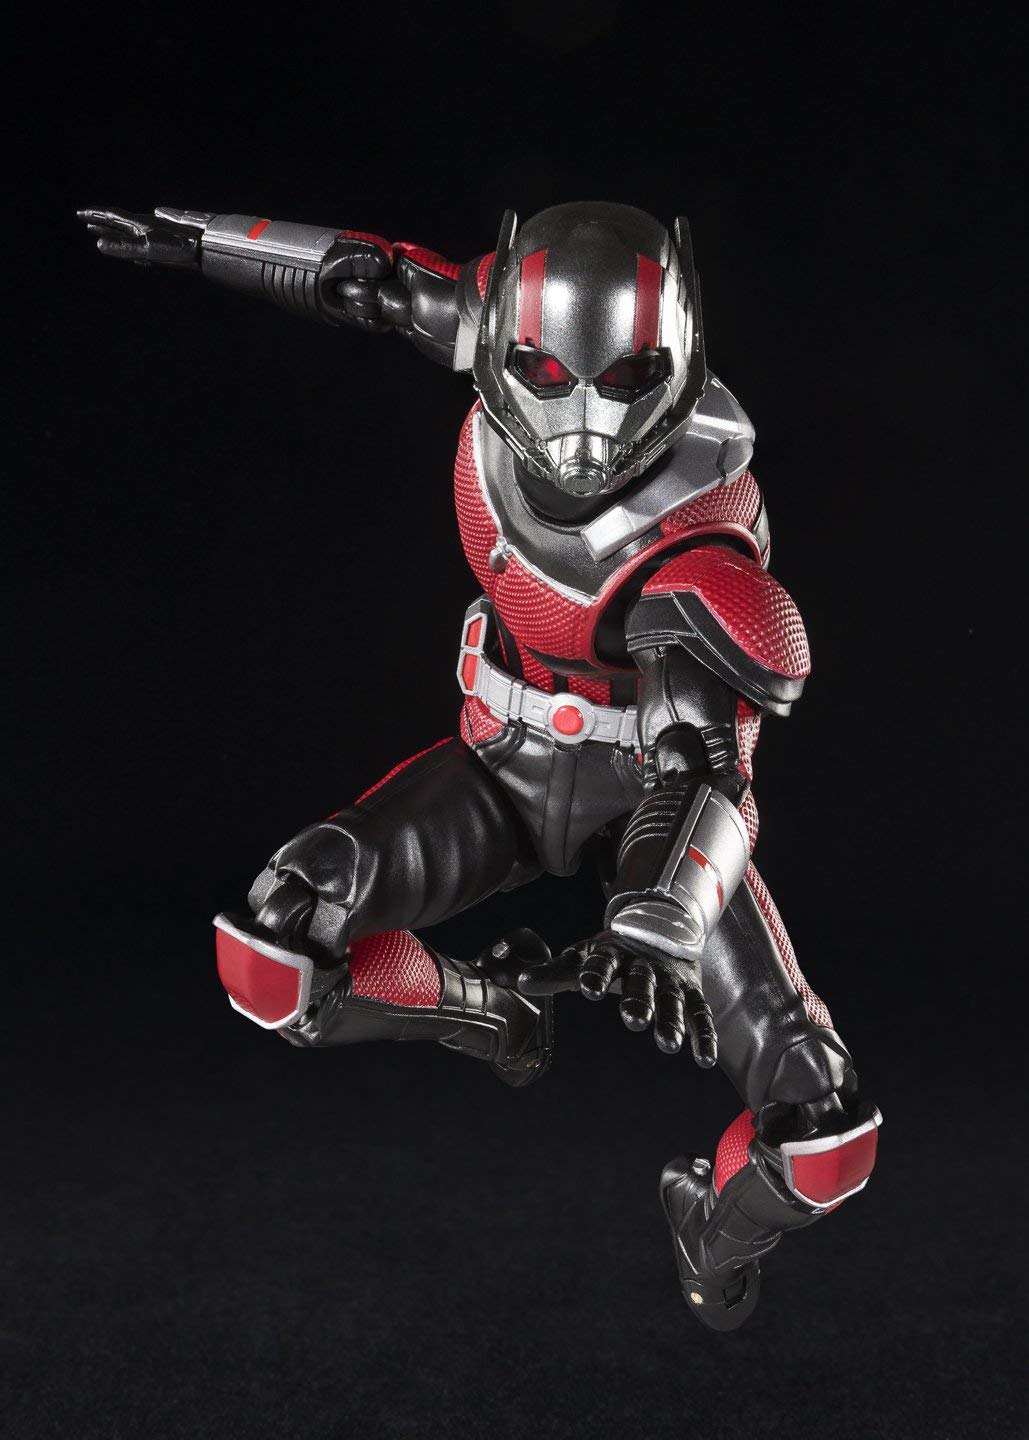 S.H. Figuarts Wasp Ant-Man and The Wasp Action Figure 2